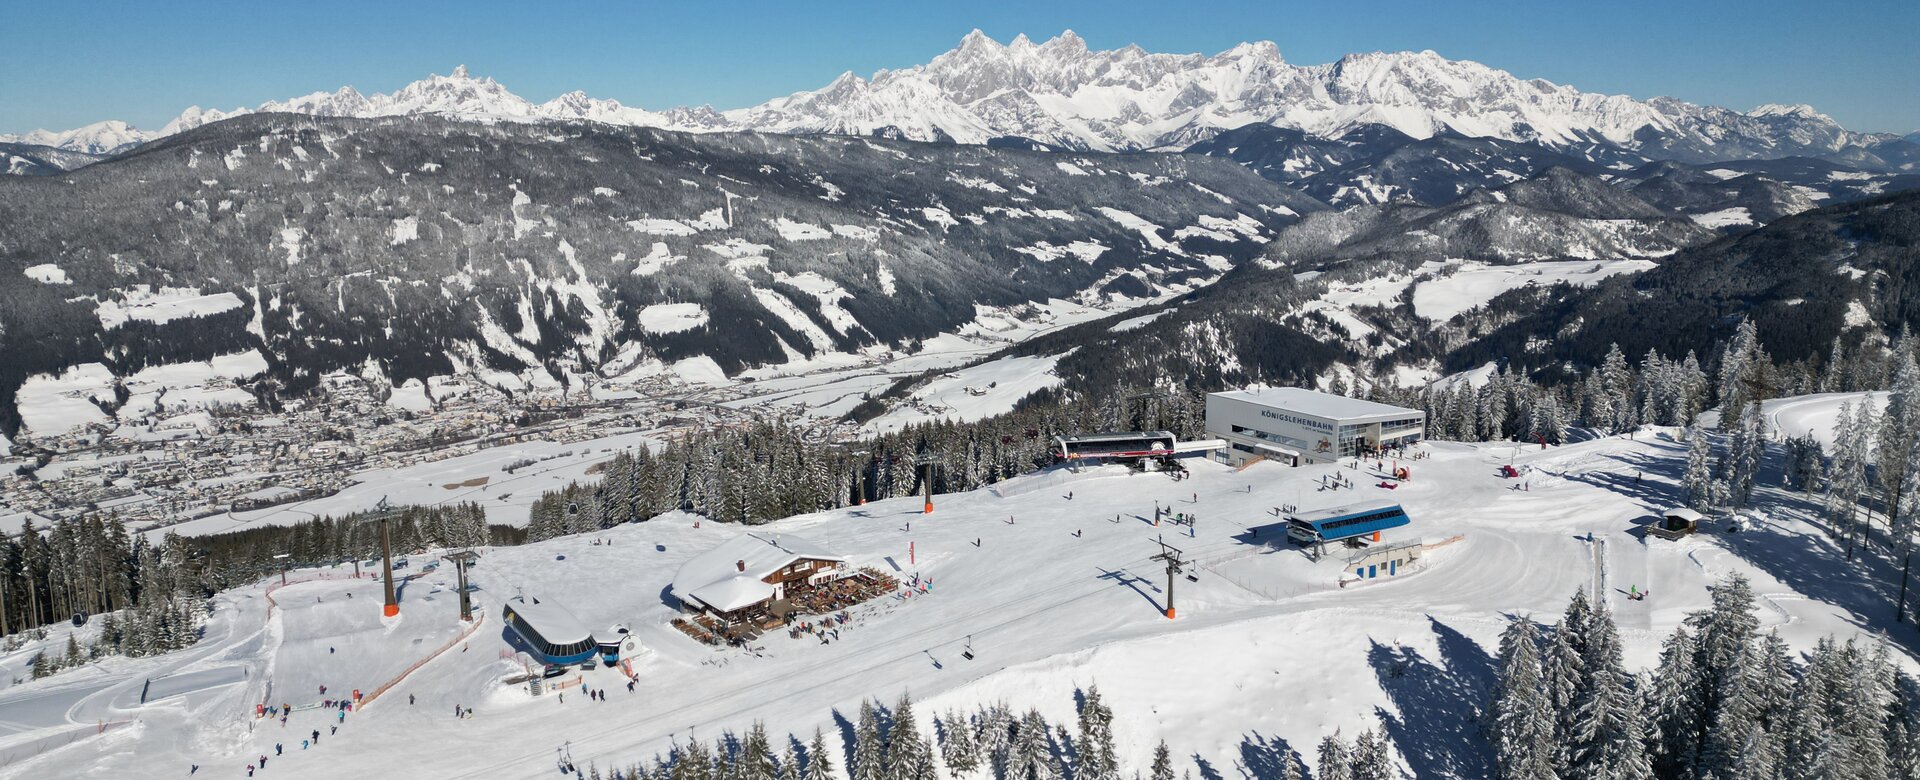 A gondola station, two chairlift stations and a ski hut from above and many houses can be seen in the valley below